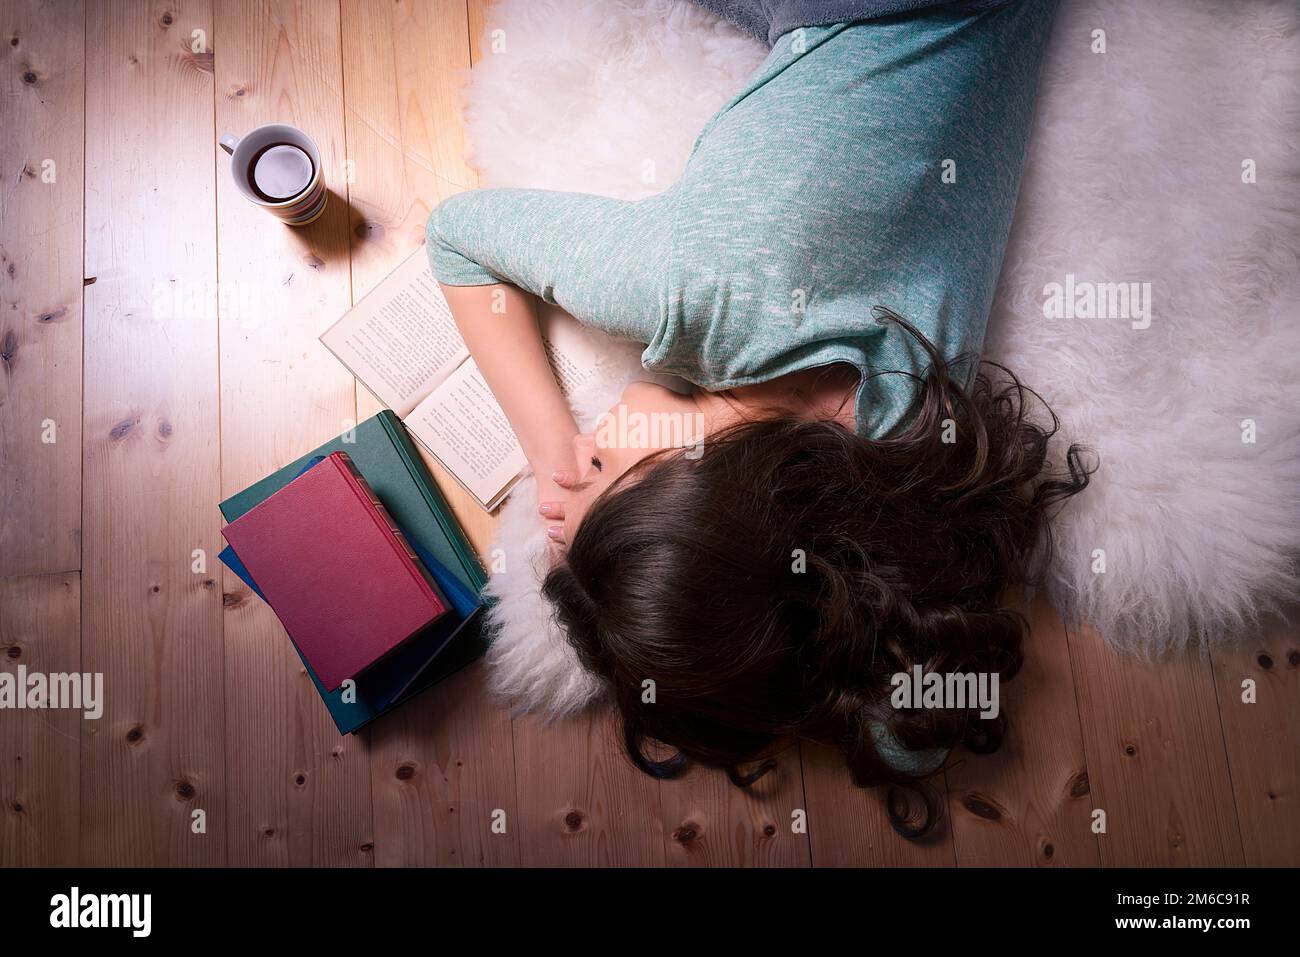 Young woman sleeping on an open book Stock Photo